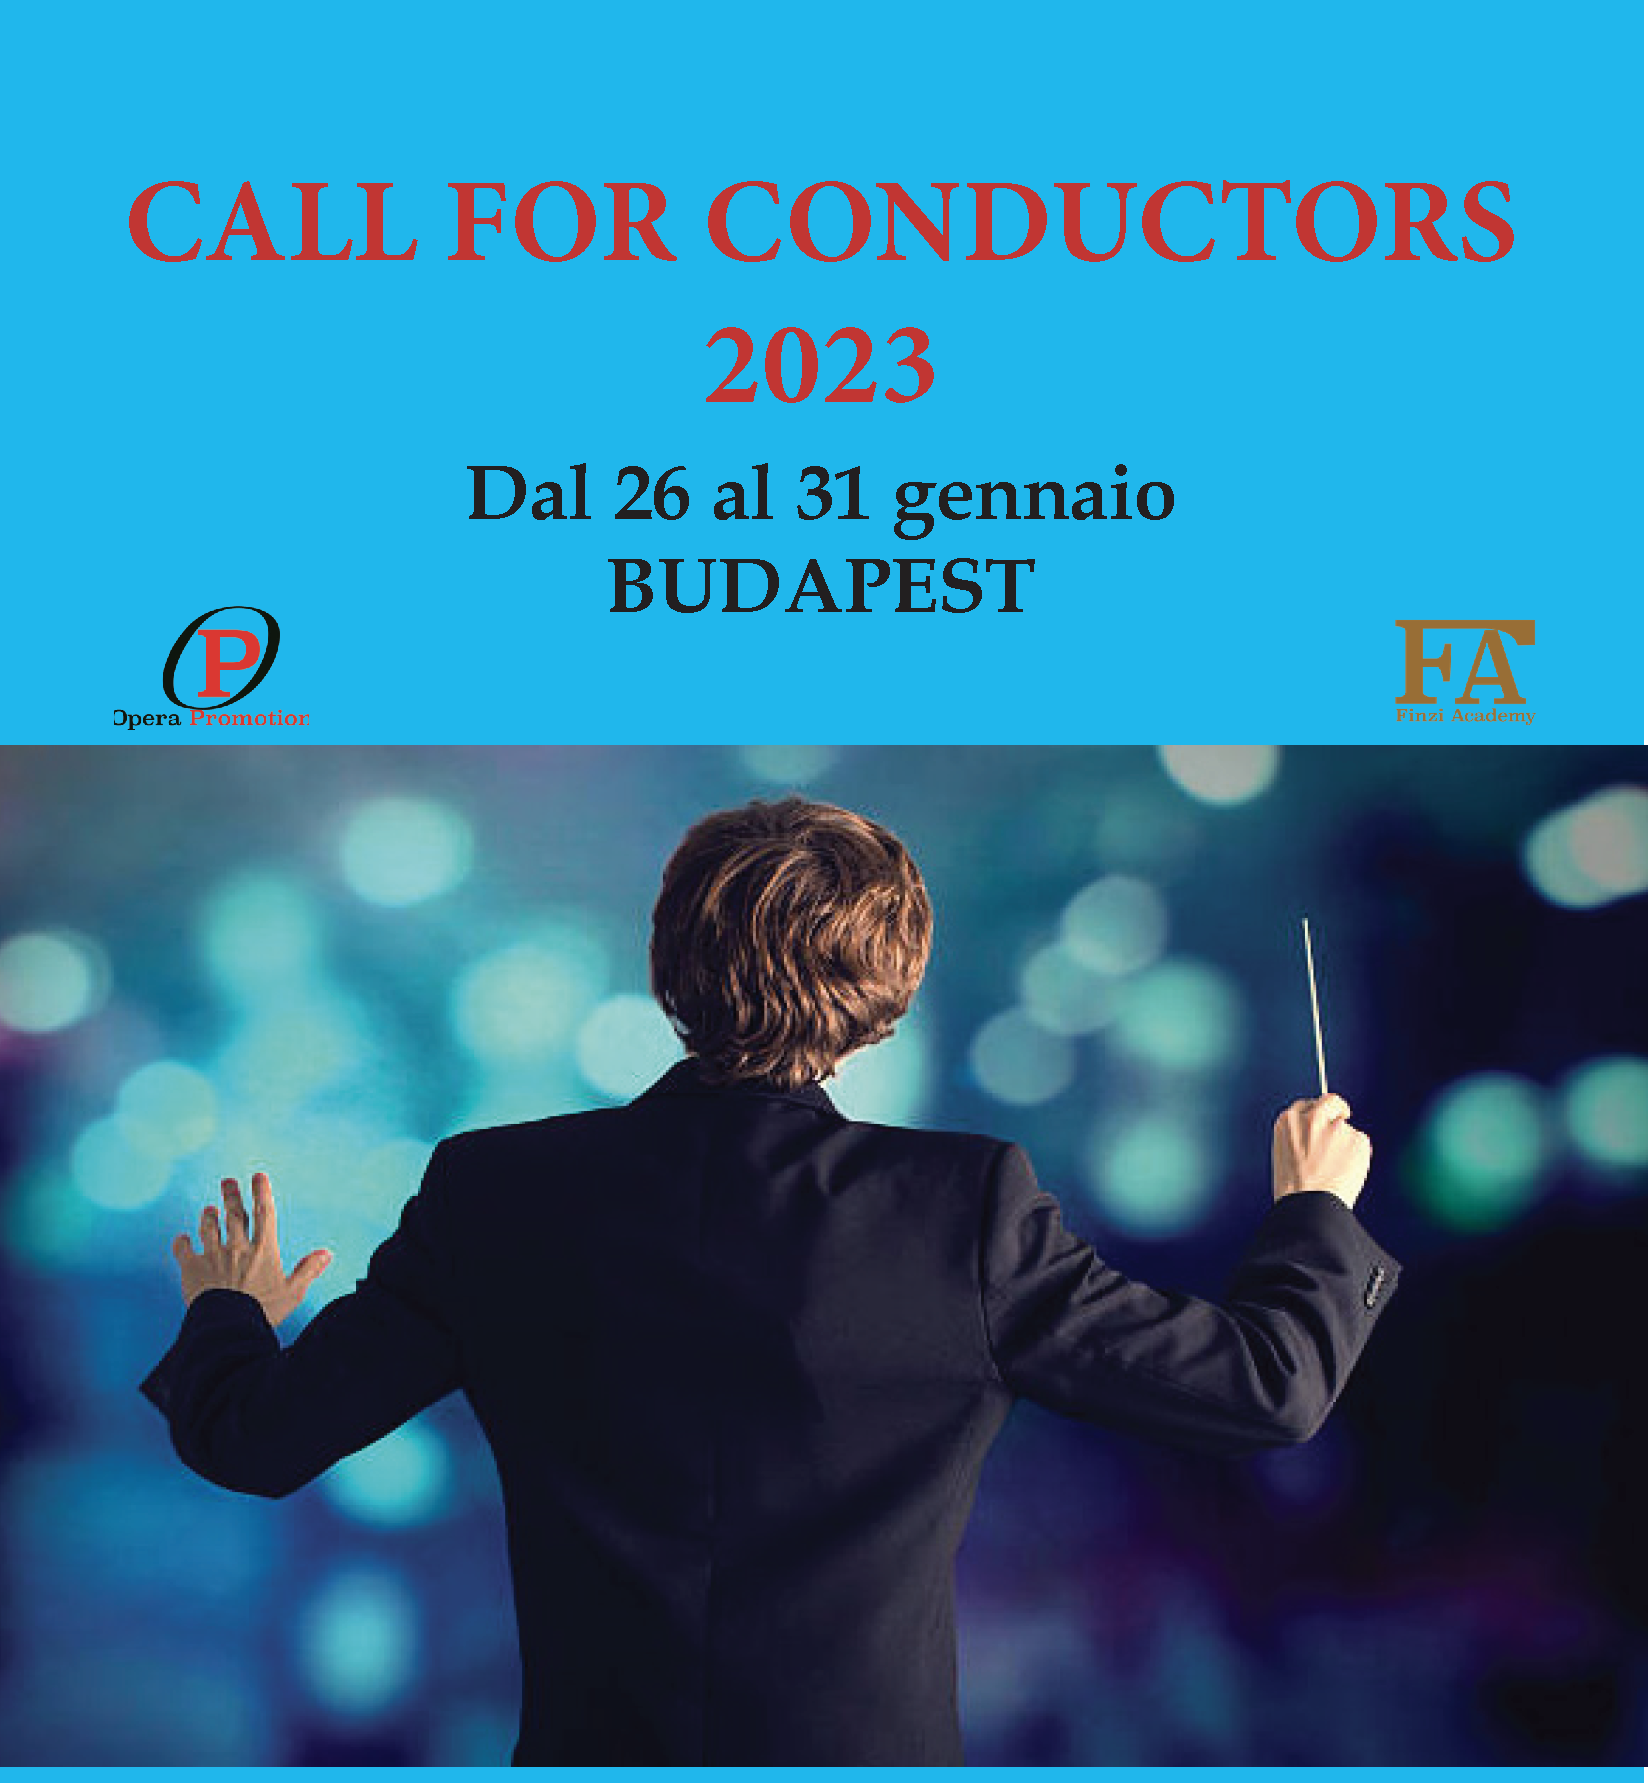 Call for conductors